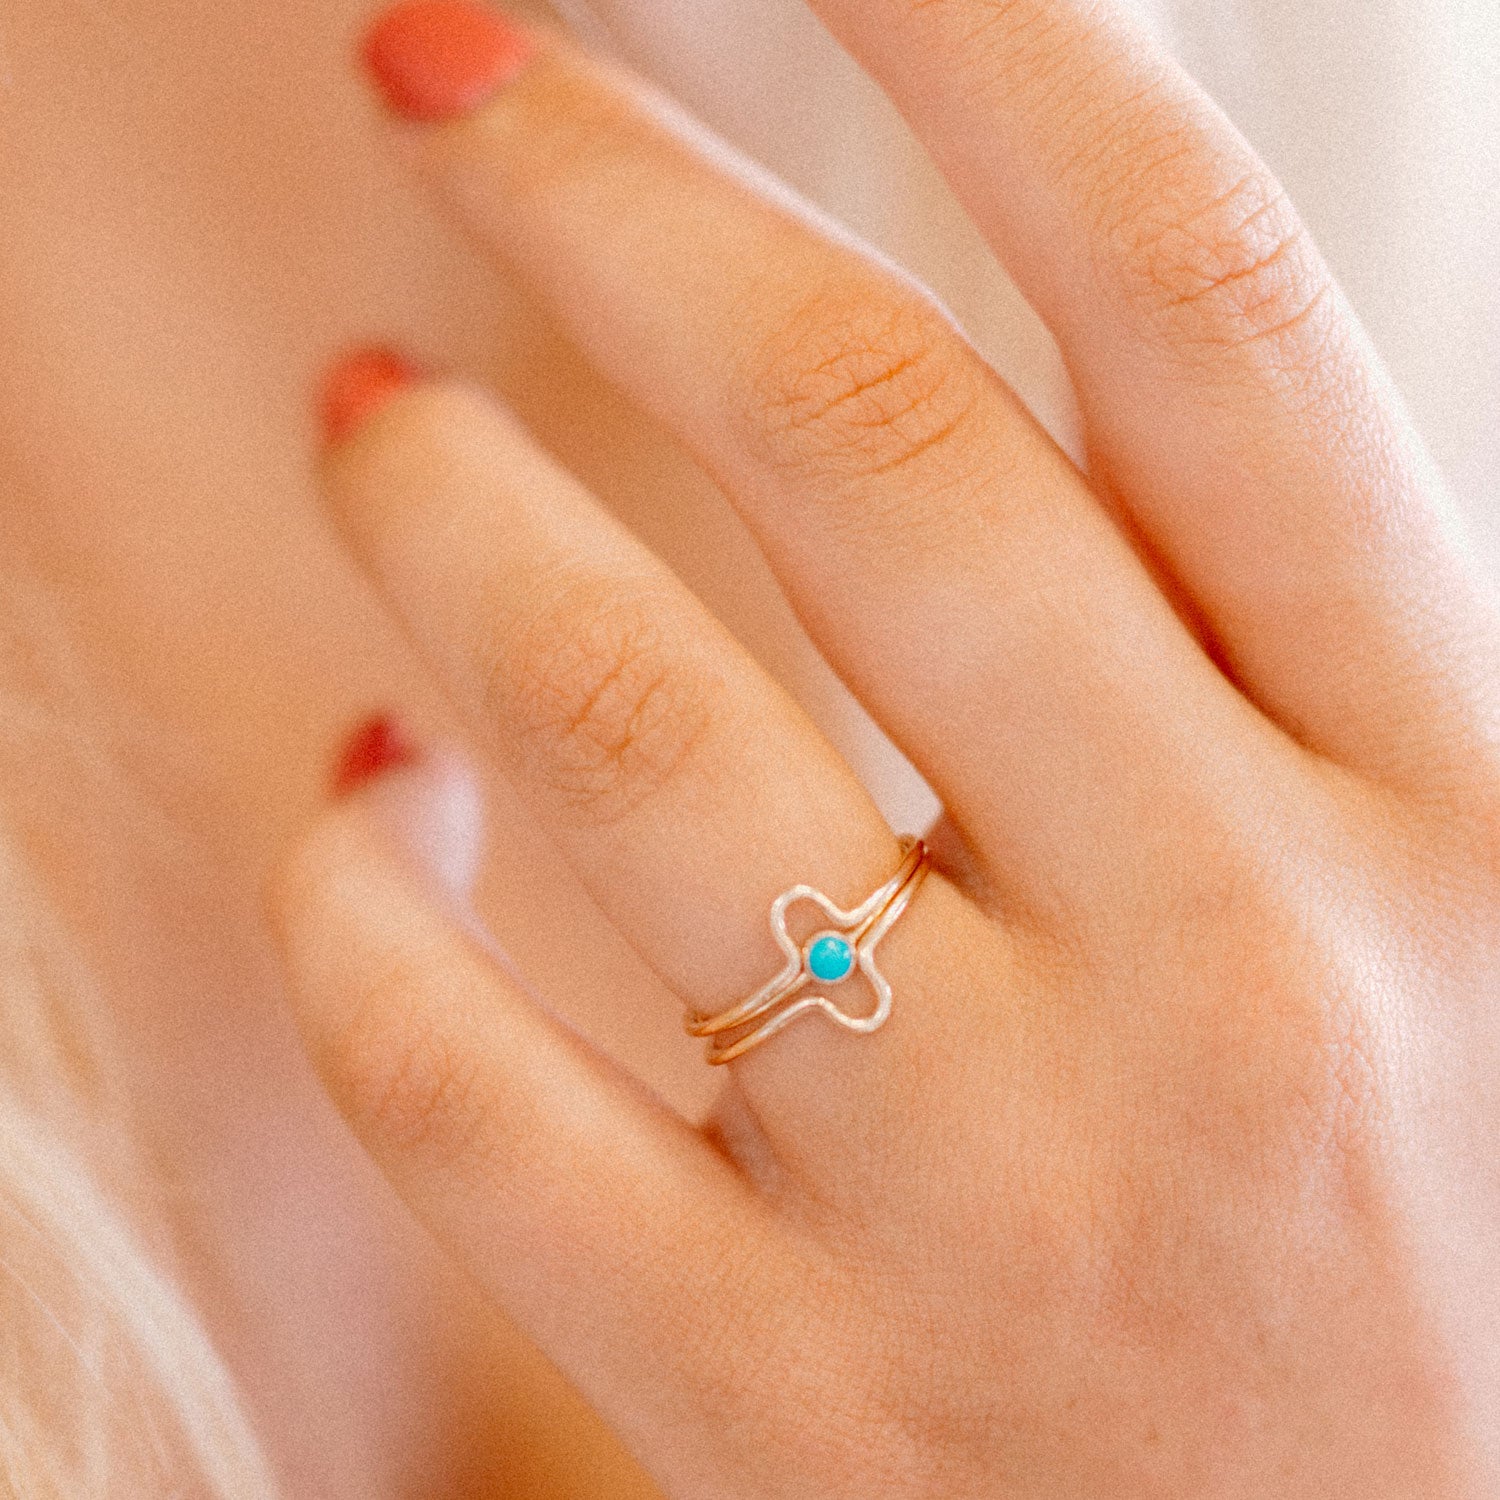 Turquoise Art Deco Inspired Stacking Ring Set - Favor Jewelry